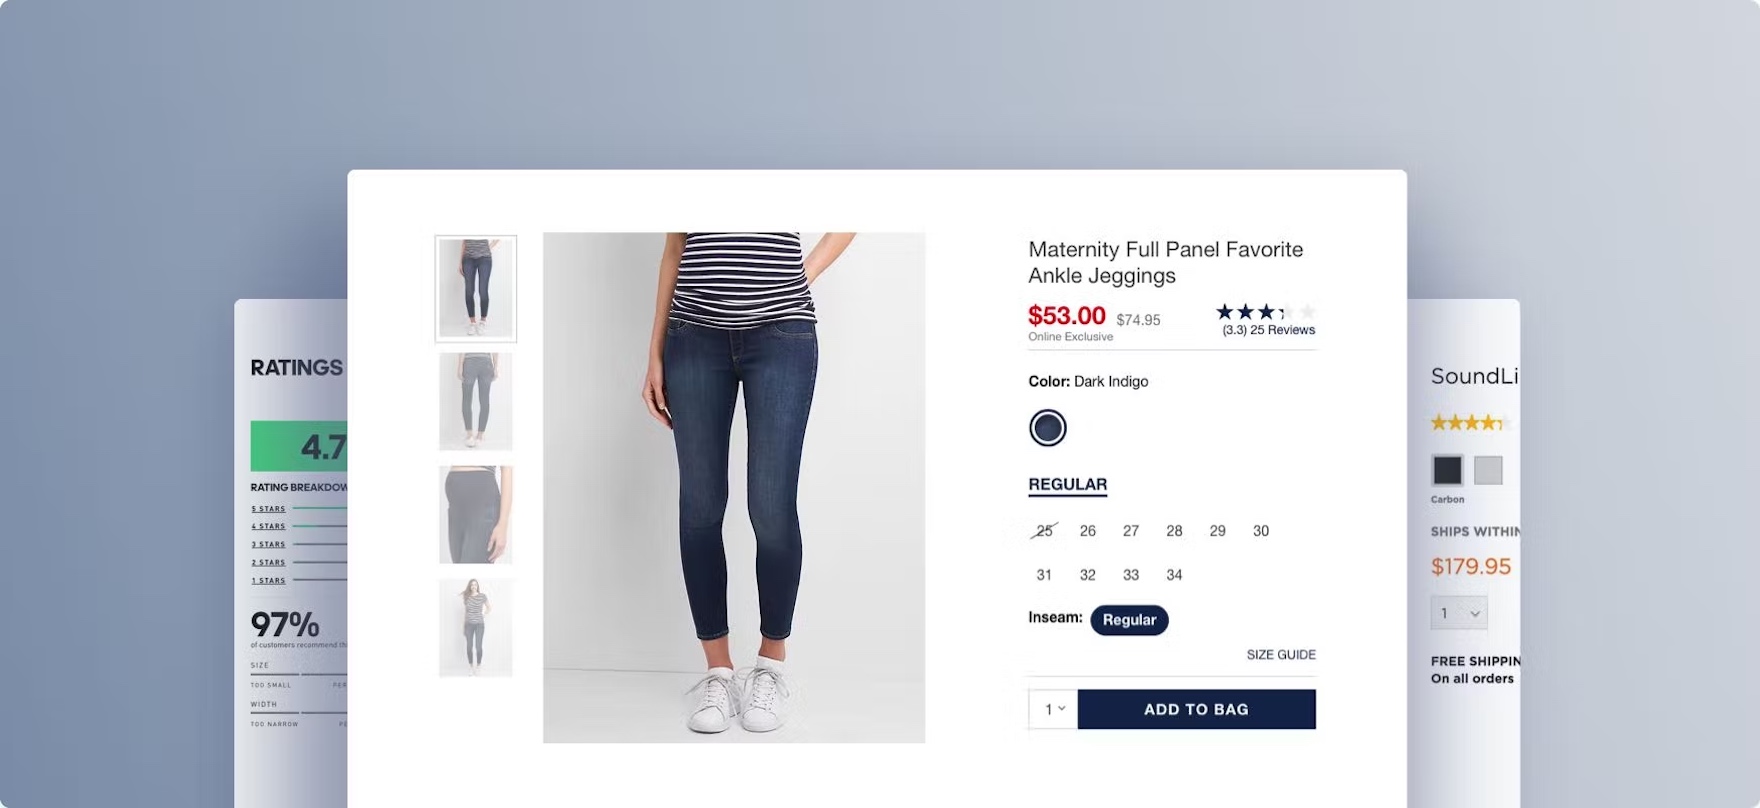 The Current State of E-Commerce Product Page UX Performance (15 Best Practices) – Articles – Baymard Institute